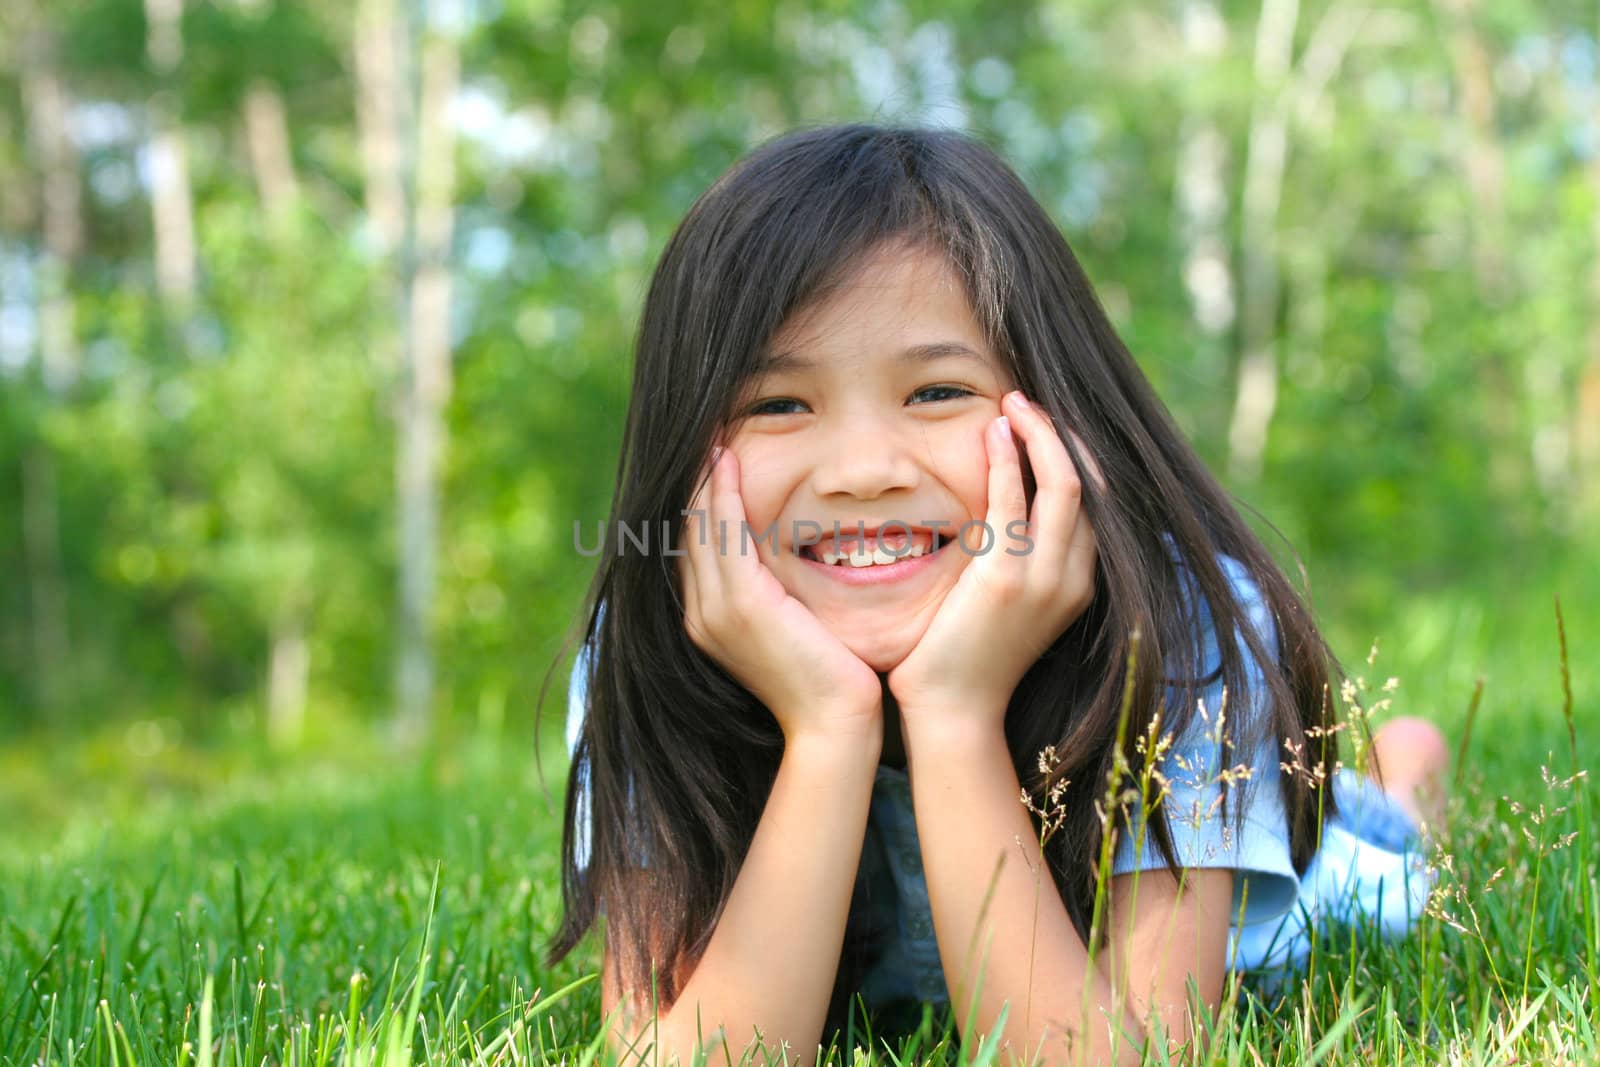 Child lying on grass with head on hands, smiling by jarenwicklund